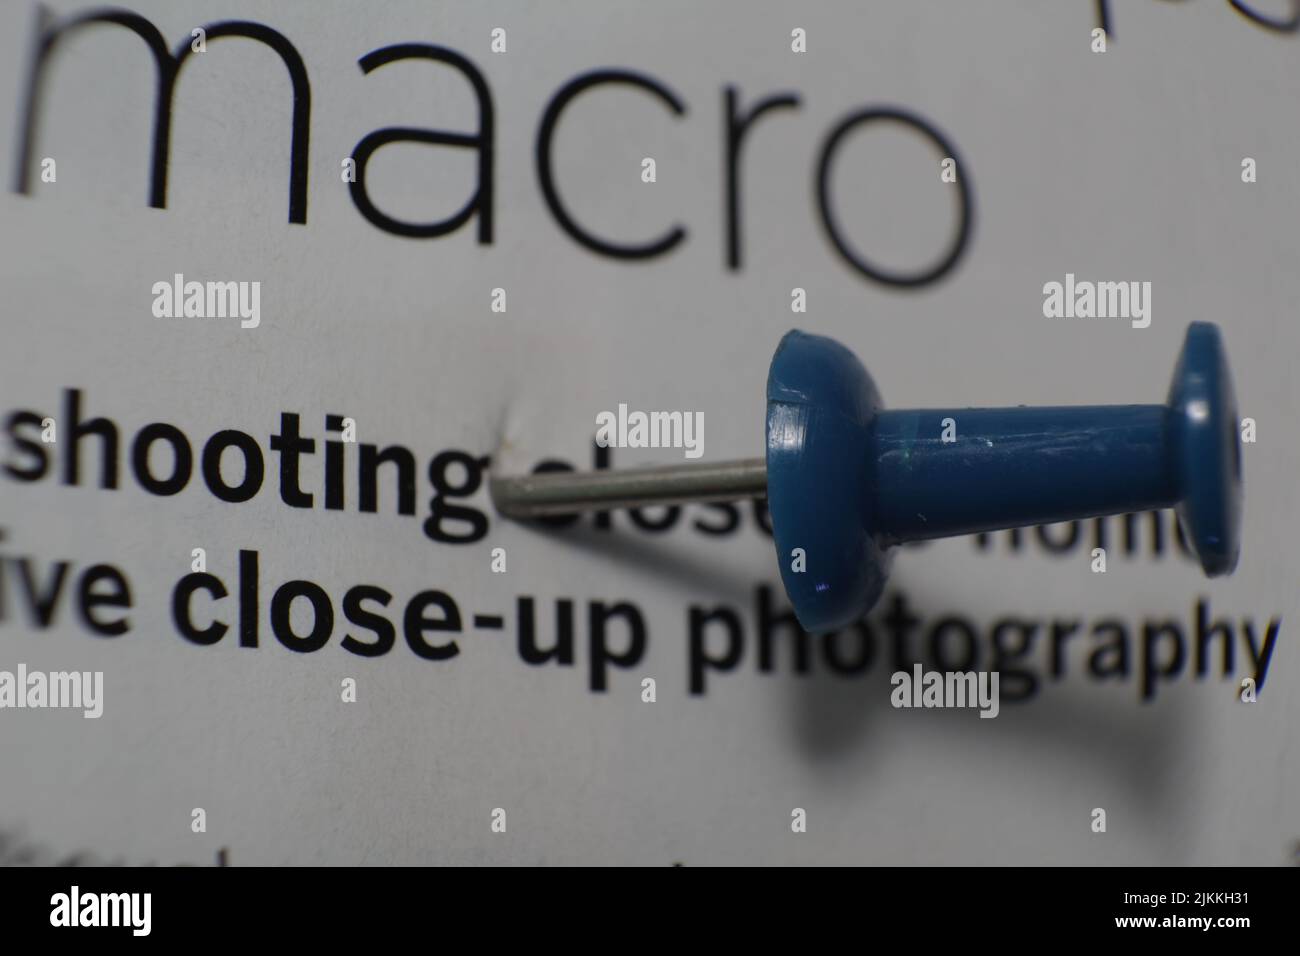 A closeup shot of a blue pushpin on a paper with texts Stock Photo